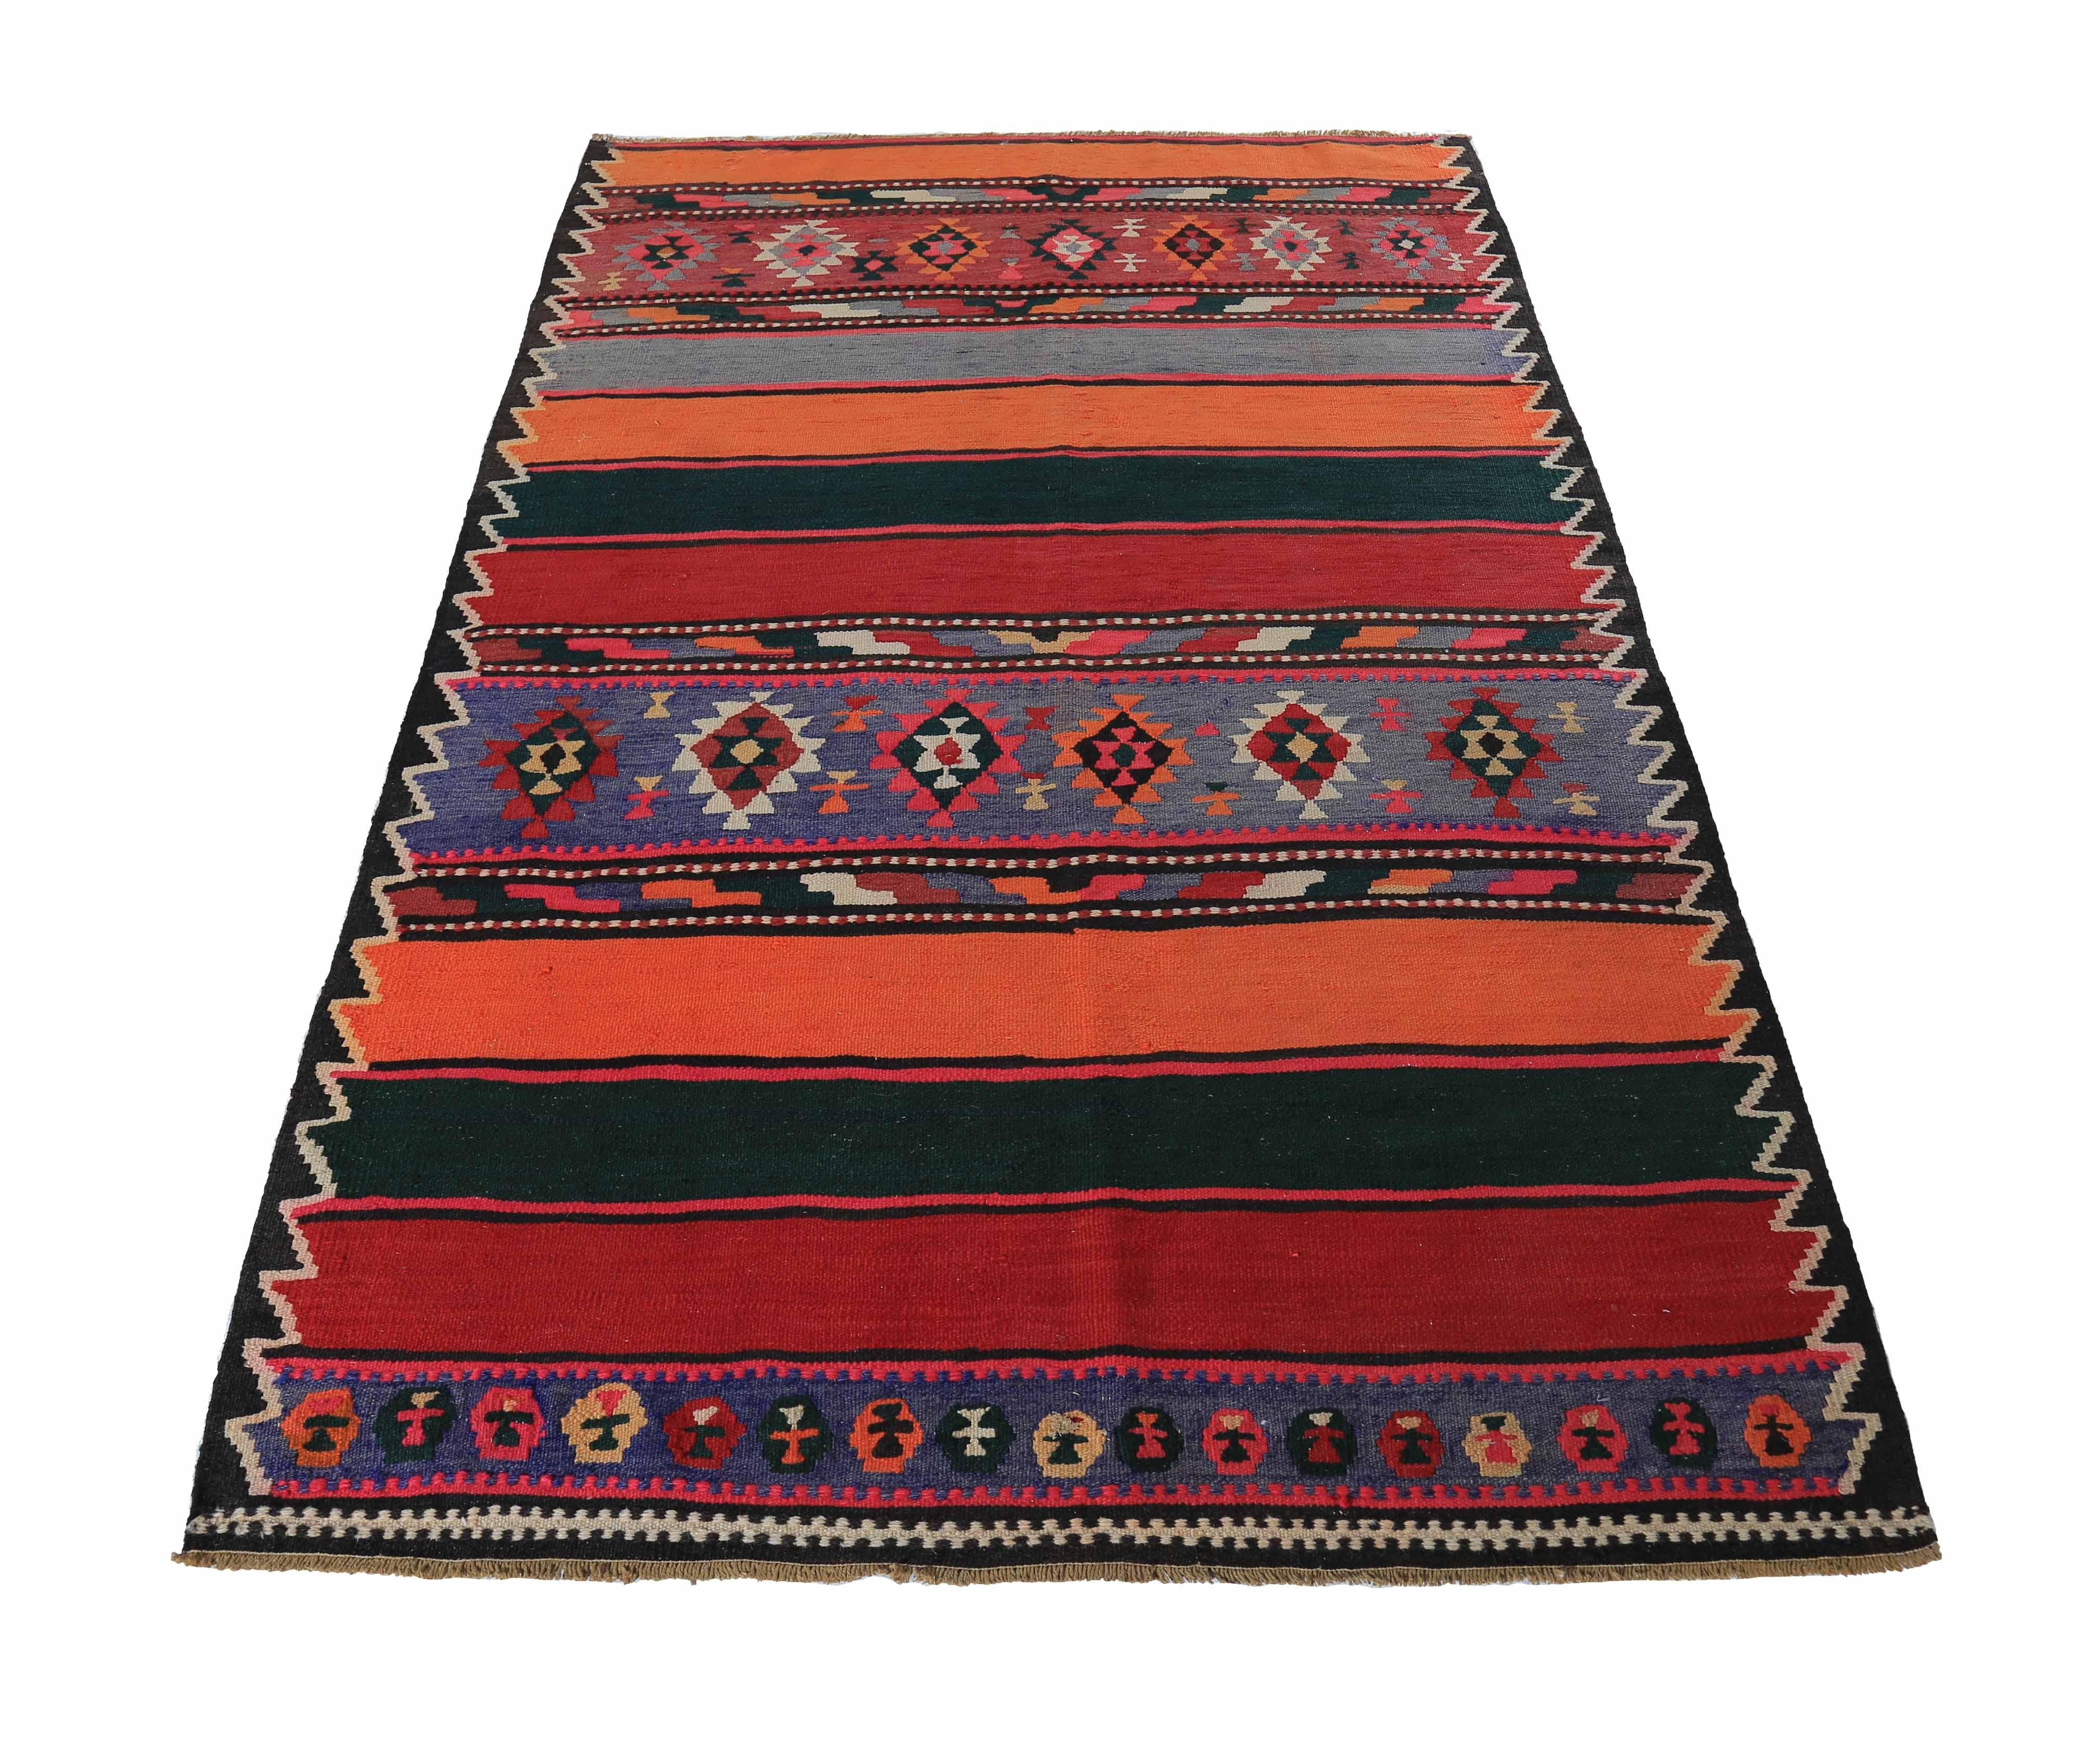 Turkish rug handwoven from the finest sheep’s wool and colored with all-natural vegetable dyes that are safe for humans and pets. It’s a traditional Kilim flat-weave design featuring green and red stripes decorated with tribal medallions. It’s a